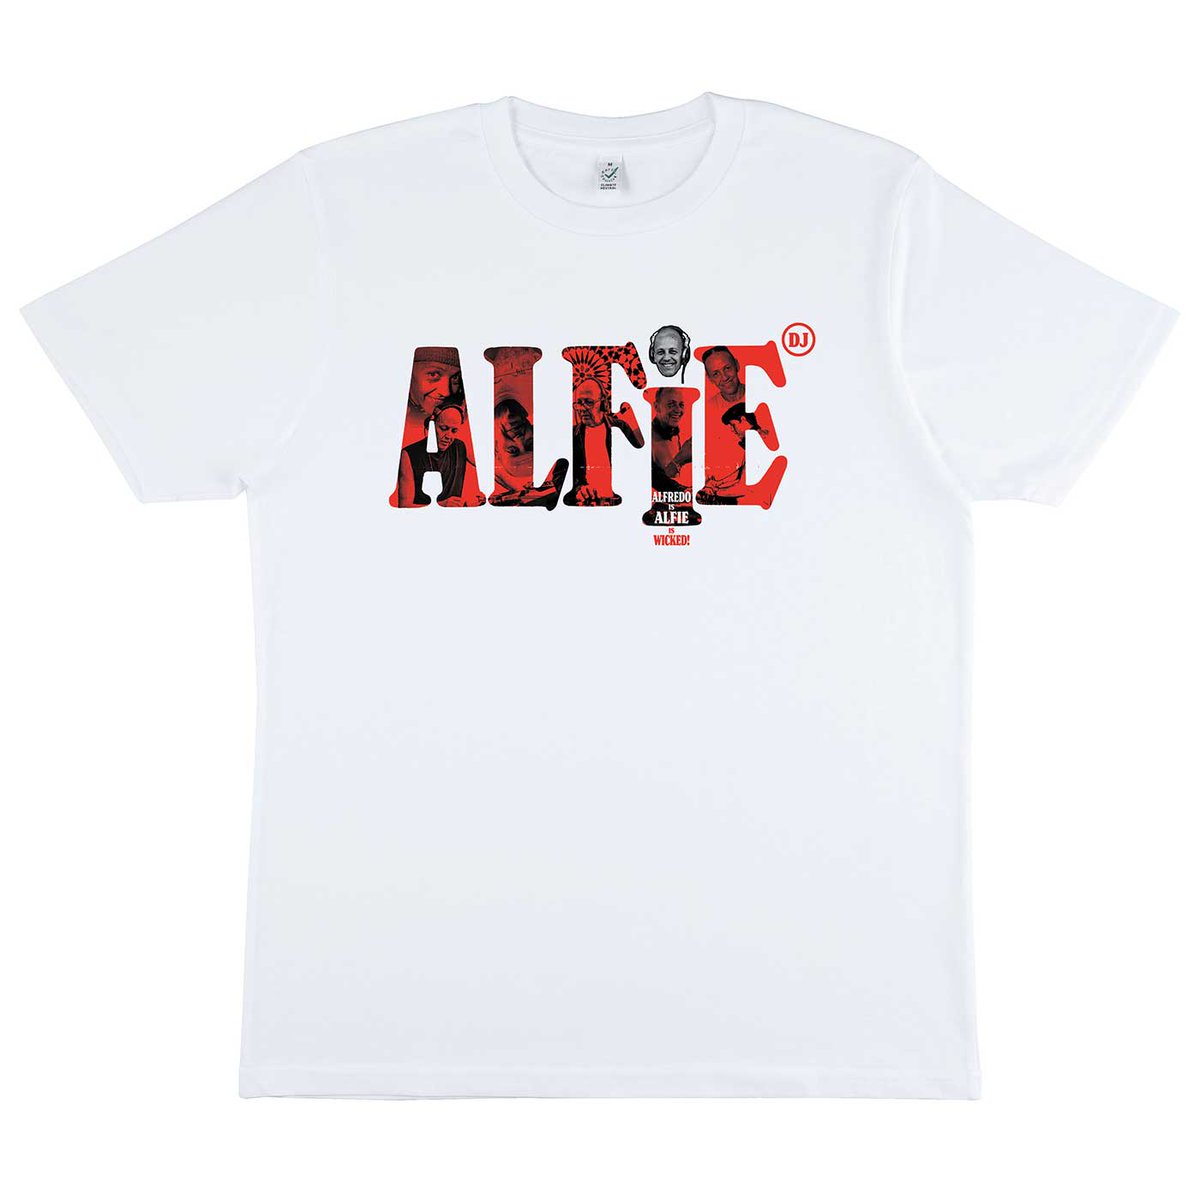 🚨LIVE! Decades ago a T-shirt was made as a gift to Alfredo that was a pastiche of the movie poster ‘Alfie’, starring Michael Caine, from the swinging 60s. Most folks address him as Alfredo, his Spanish friends may abbreviate it to ‘Fredo if they know him well enough to break the